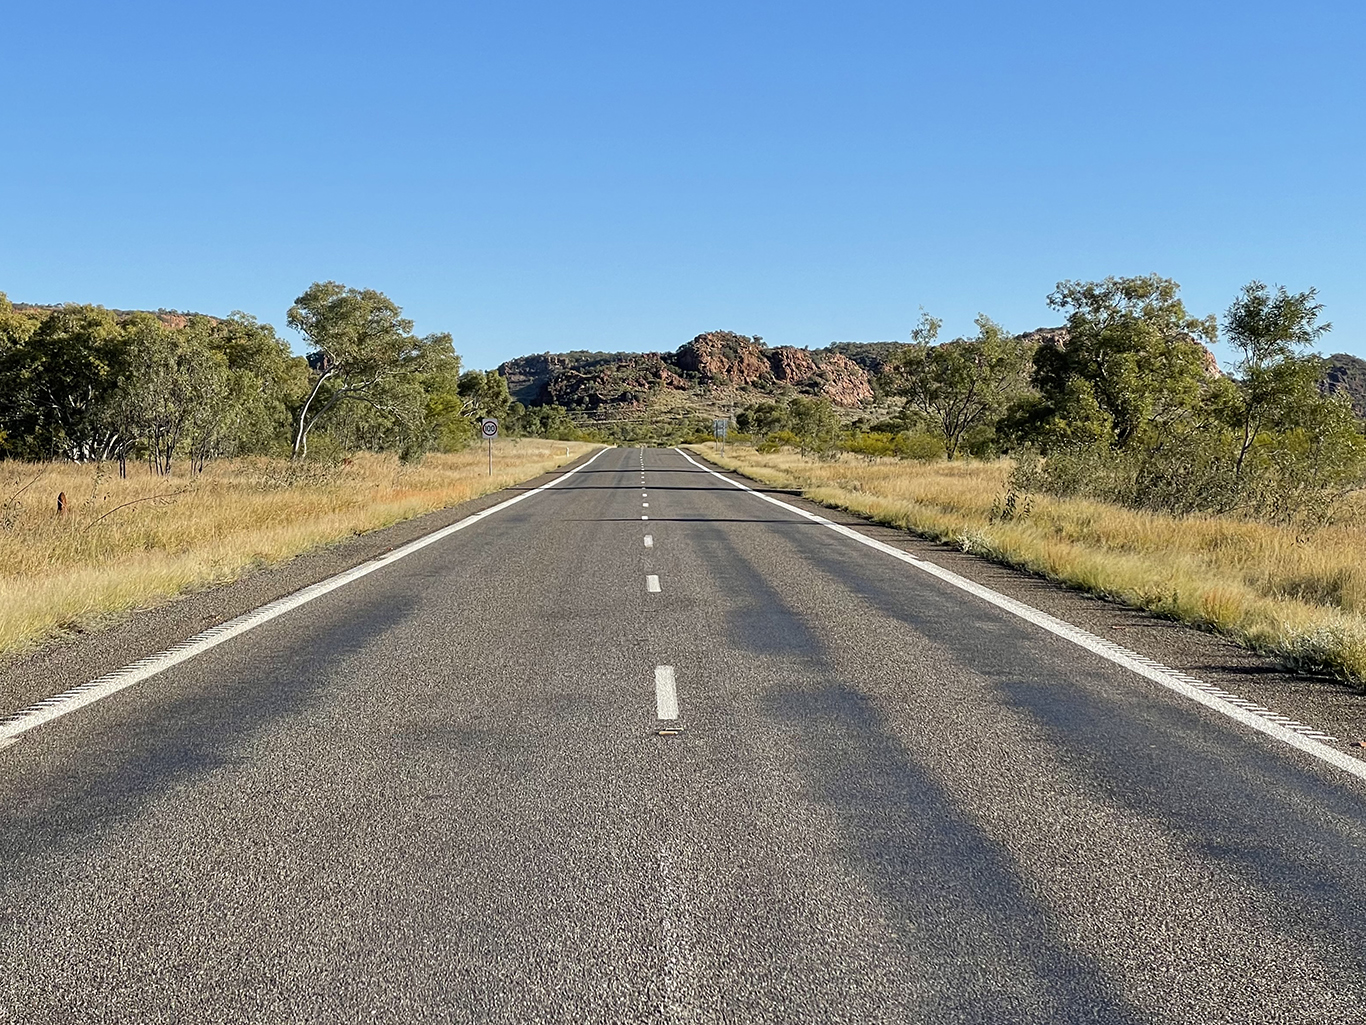 Outback Qld Road Trip